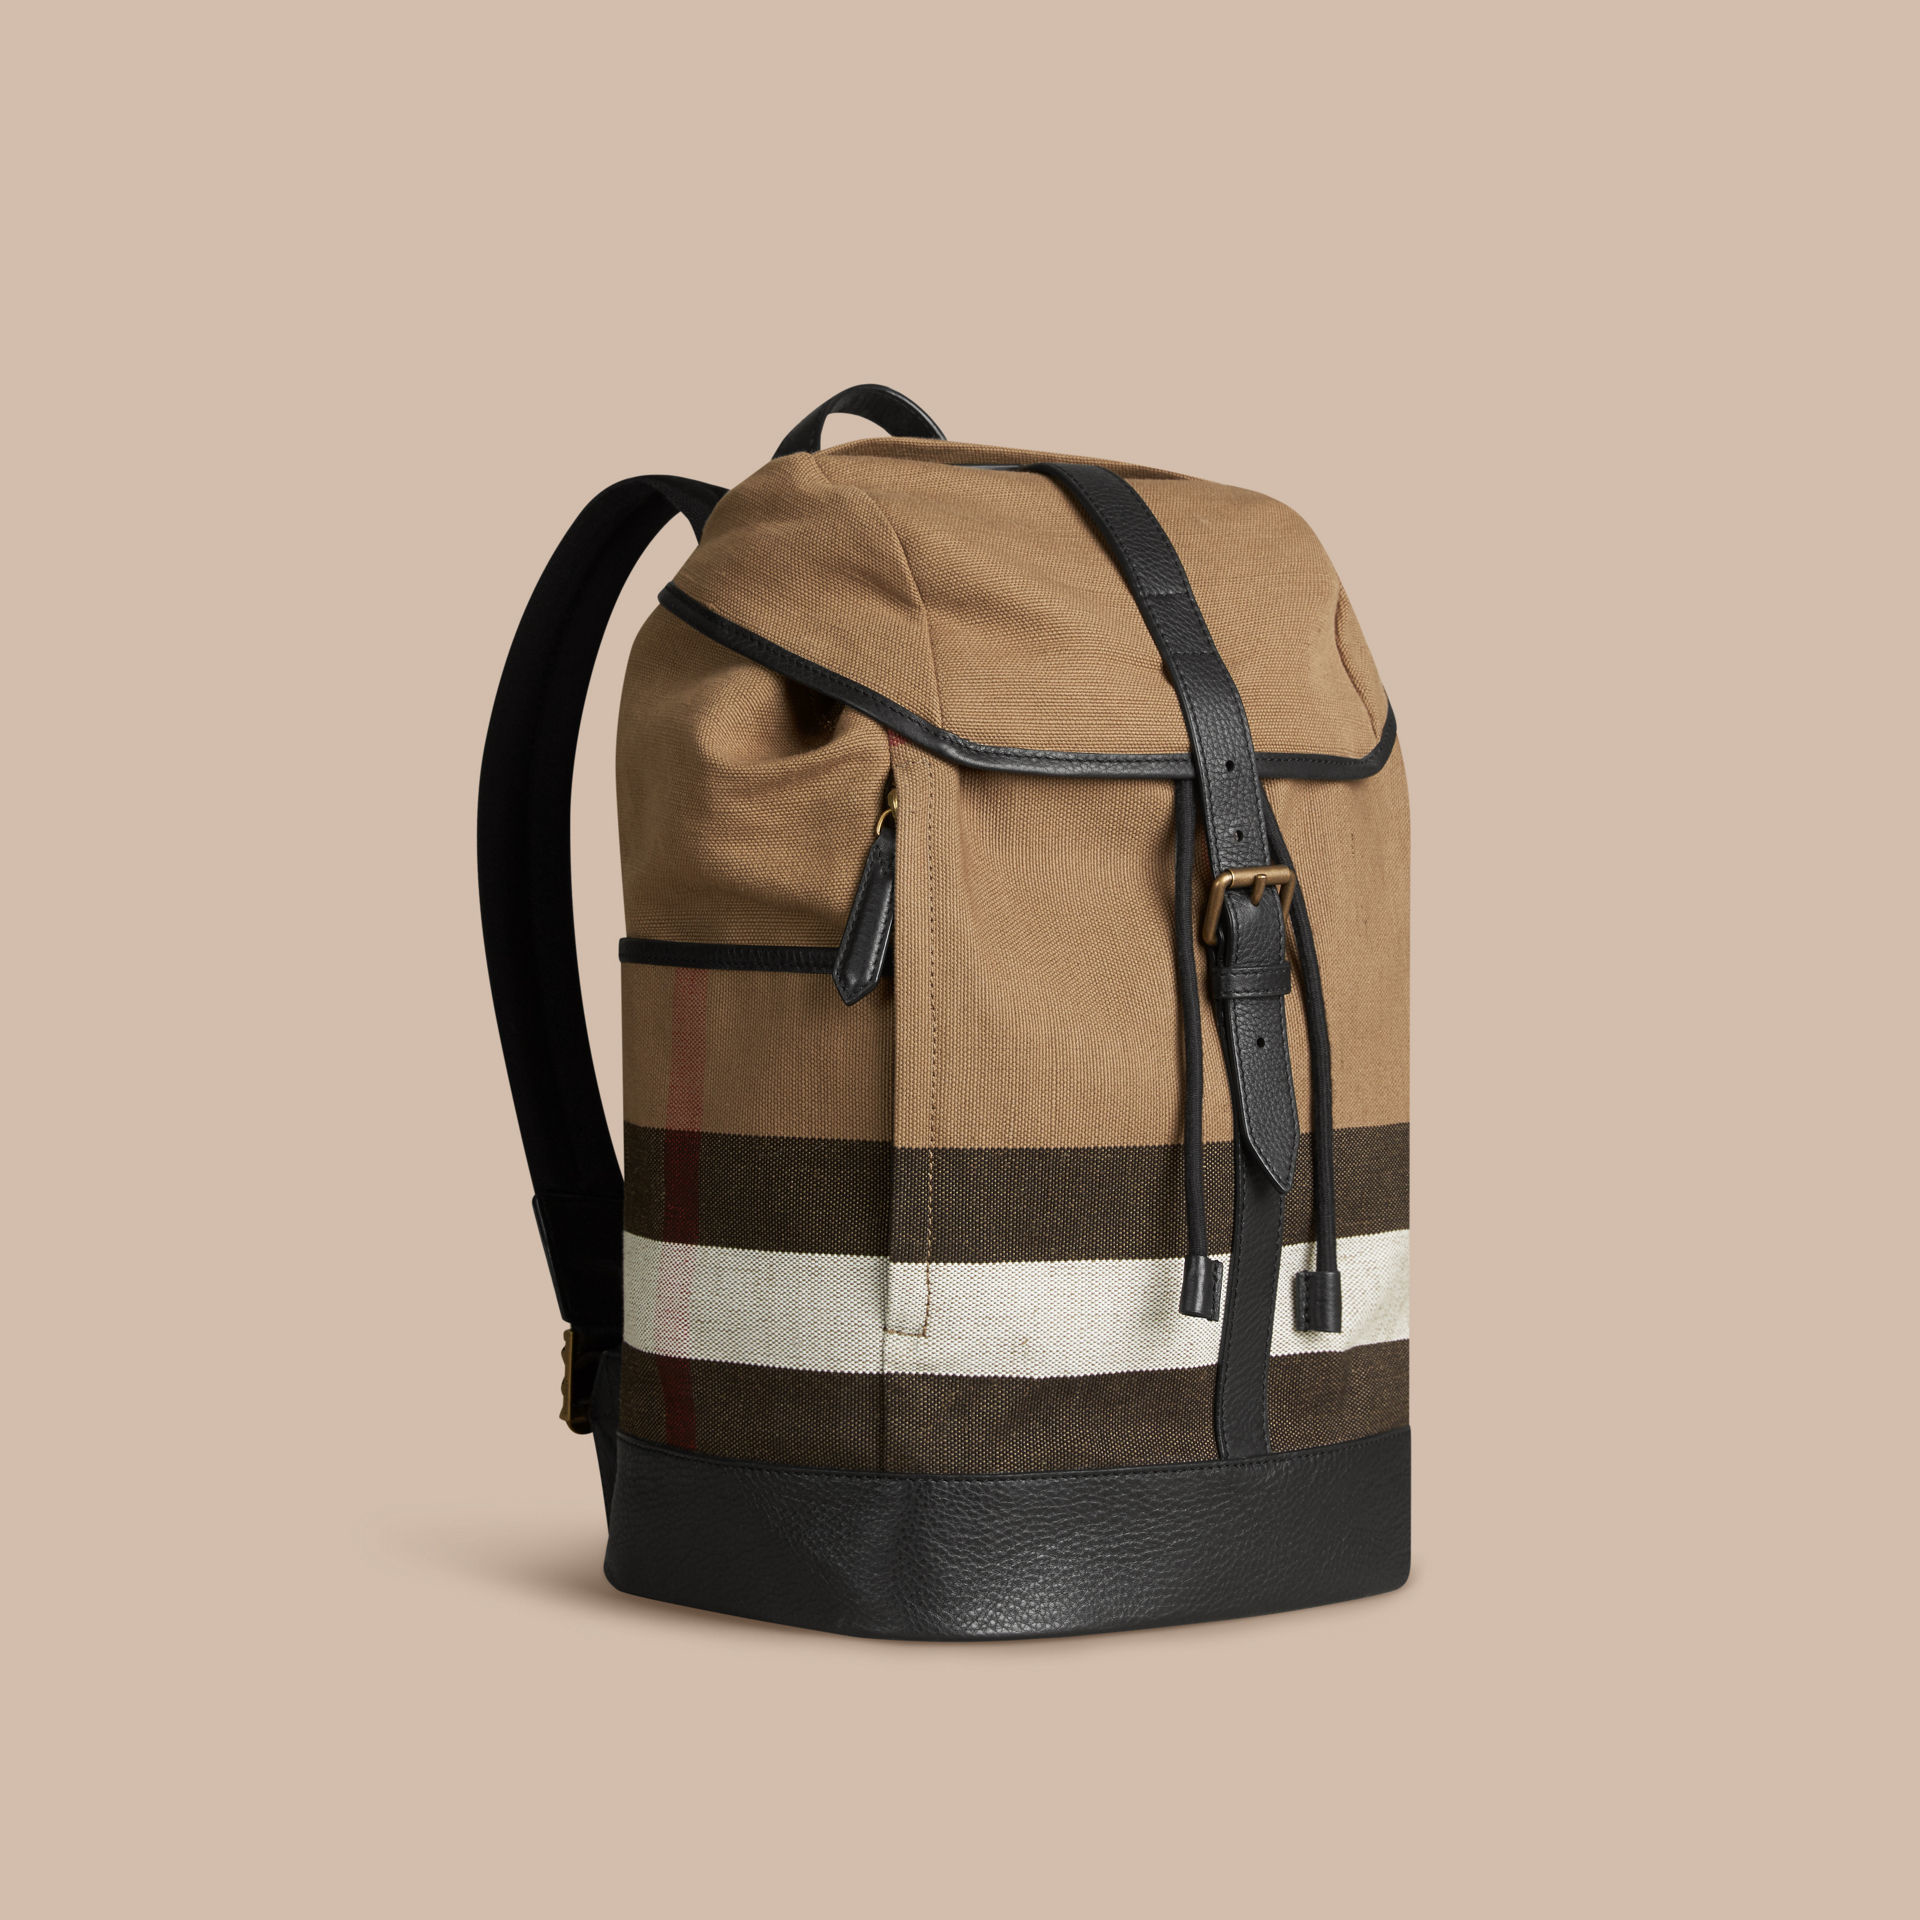 Burberry Backpack Mens Sale | IUCN Water